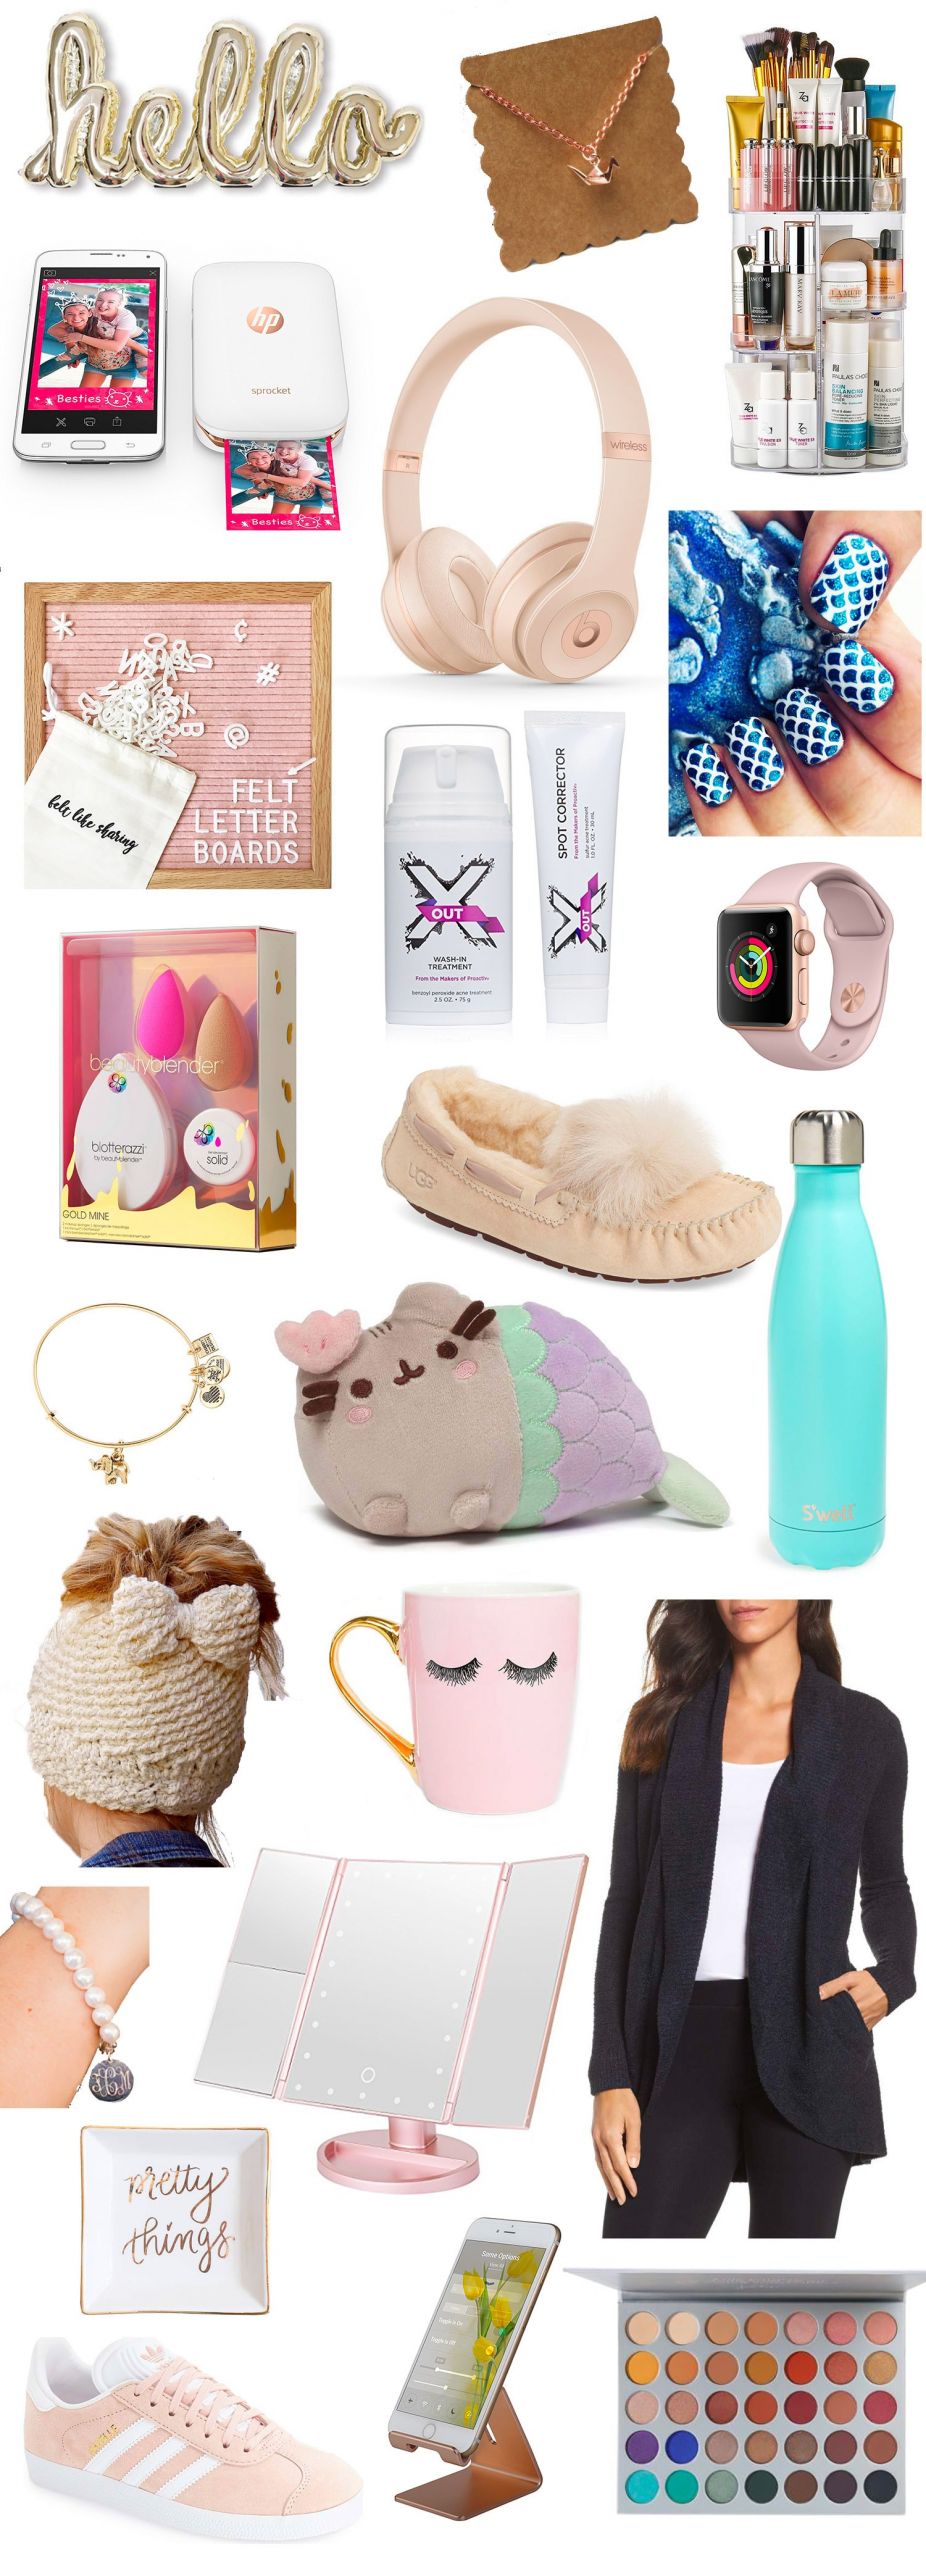 Gift Ideas For Young Girls
 Top Gifts for Teens This Christmas